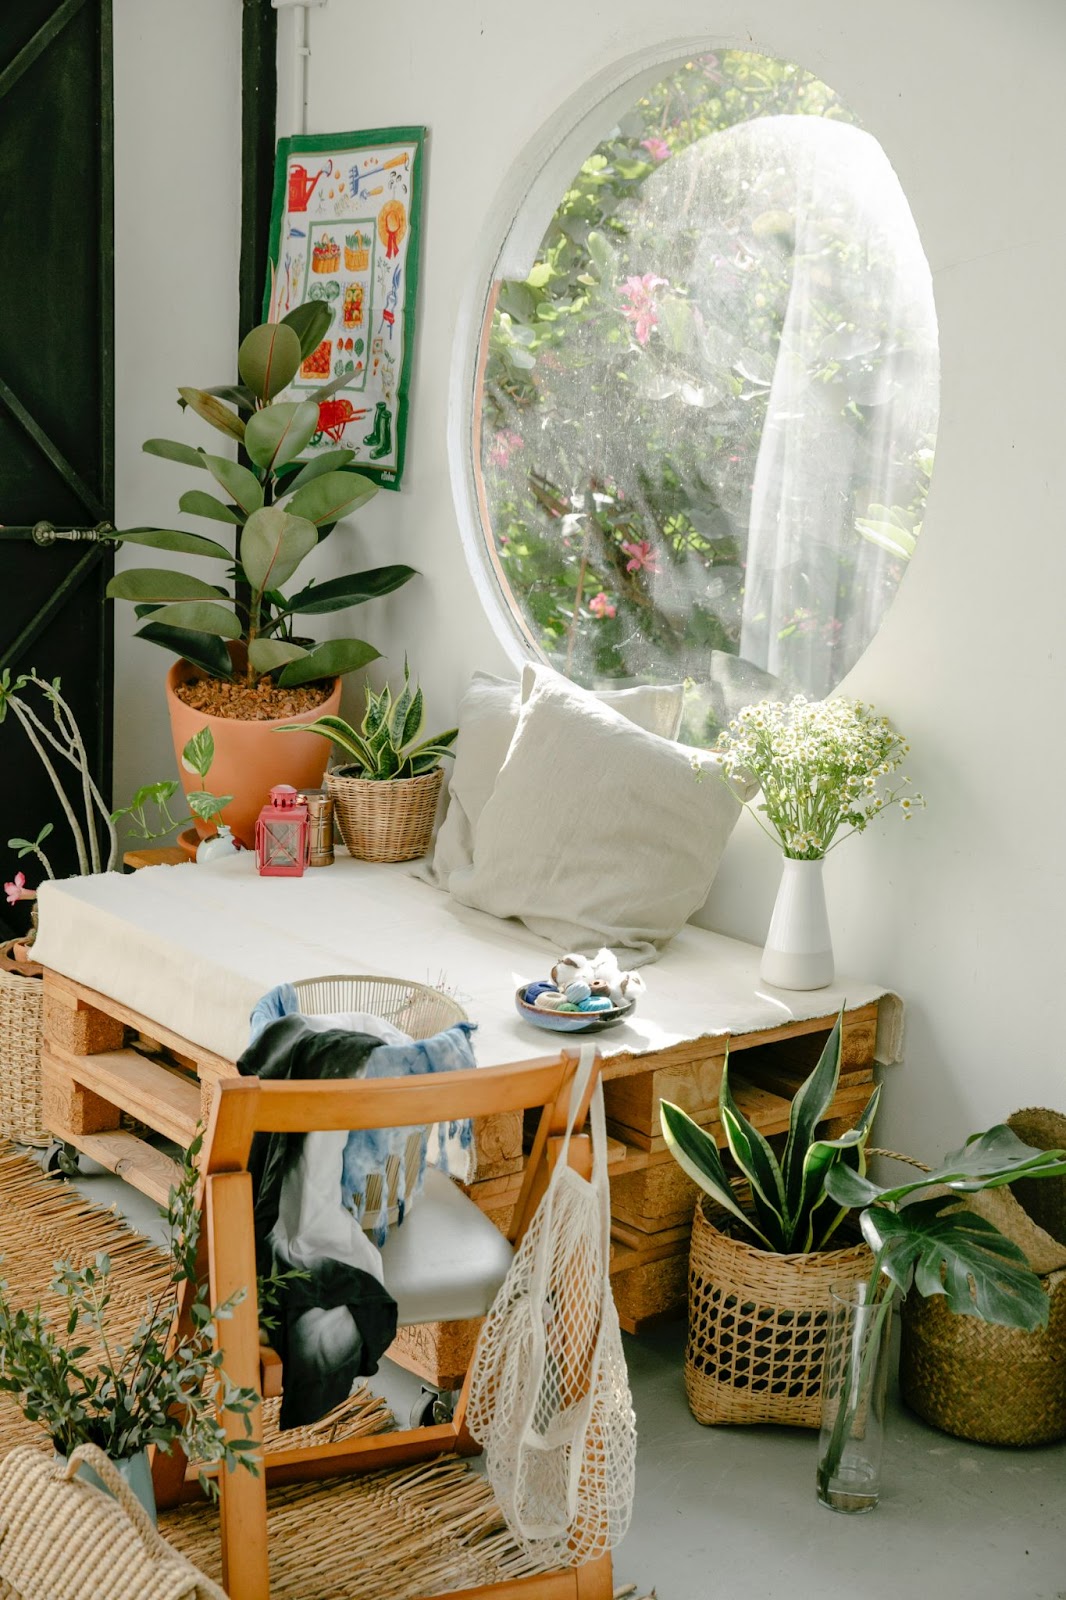 Simple lounge spot with plants and ample sunlight